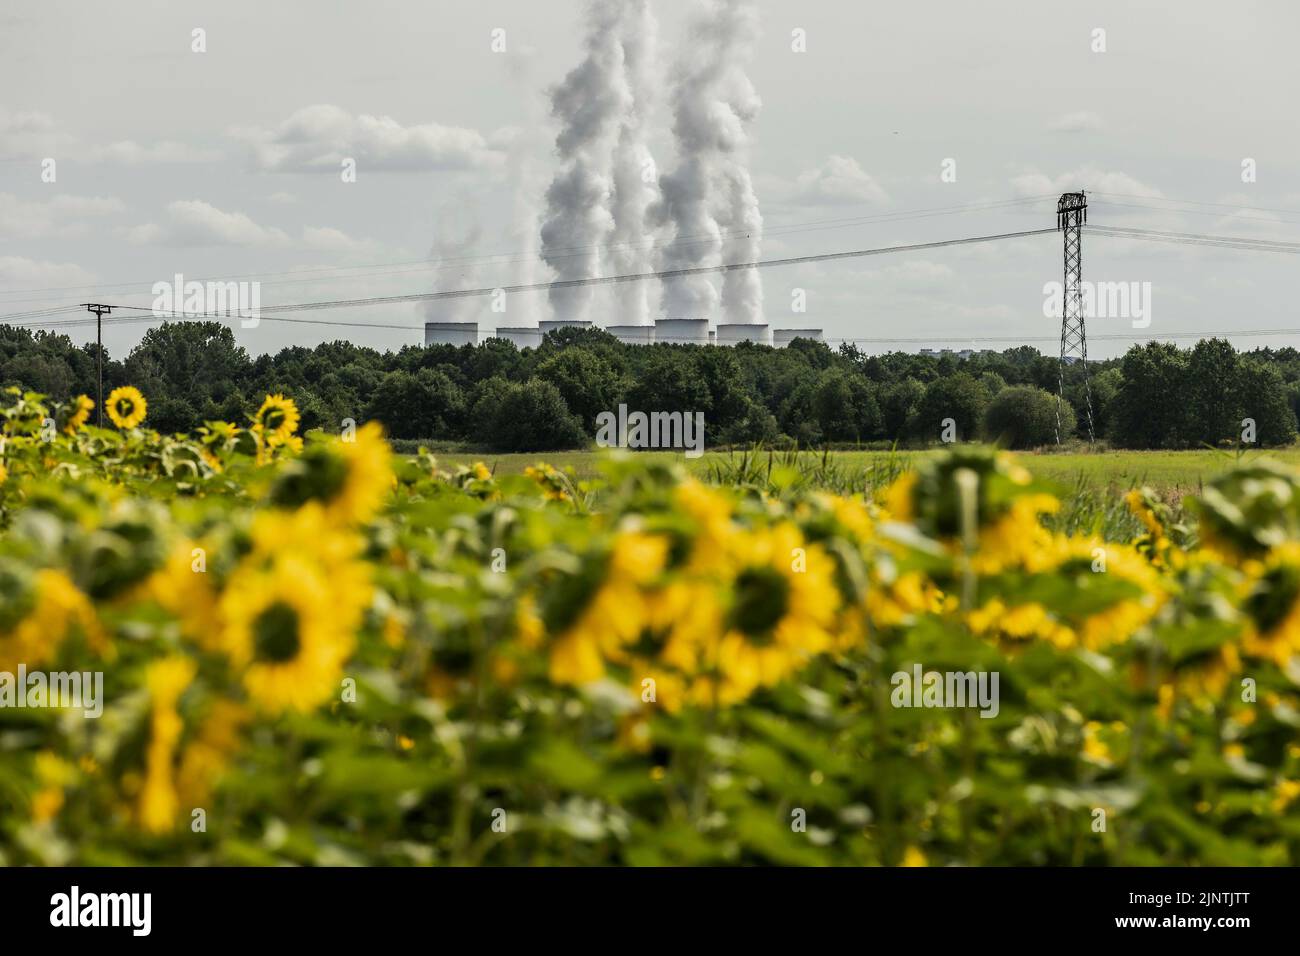 The Jaenschwalde coal-fired power plant can be seen behind partly dried-up sunflowers in Dissen-Striesow, July 28, 2022. According to the federal government's timetable for phasing out coal, the last block of the power plant is to be shut down by the end of 2028. In addition to Boxberg and Schwarze Pumpe, Jaenschwalde is one of three power plants in Lusatia whose economic infrastructure is largely dependent on coal production. Stock Photo